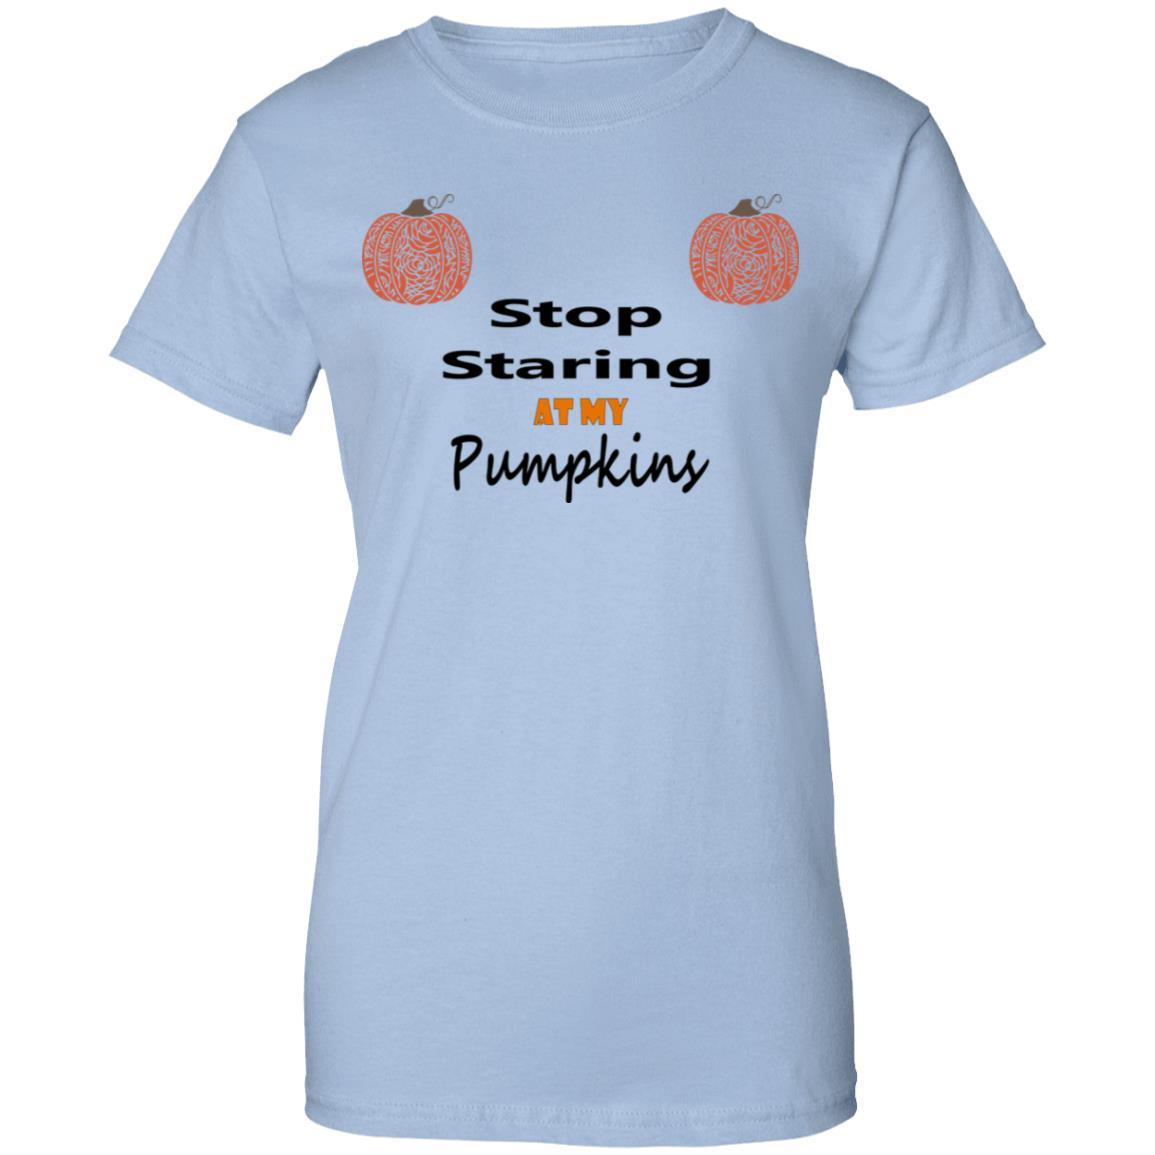 T-Shirts Light Blue / X-Small WineyBitches.Co "Stop Staring At My Pumpkins" Ladies' 100% Cotton T-Shirt WineyBitchesCo